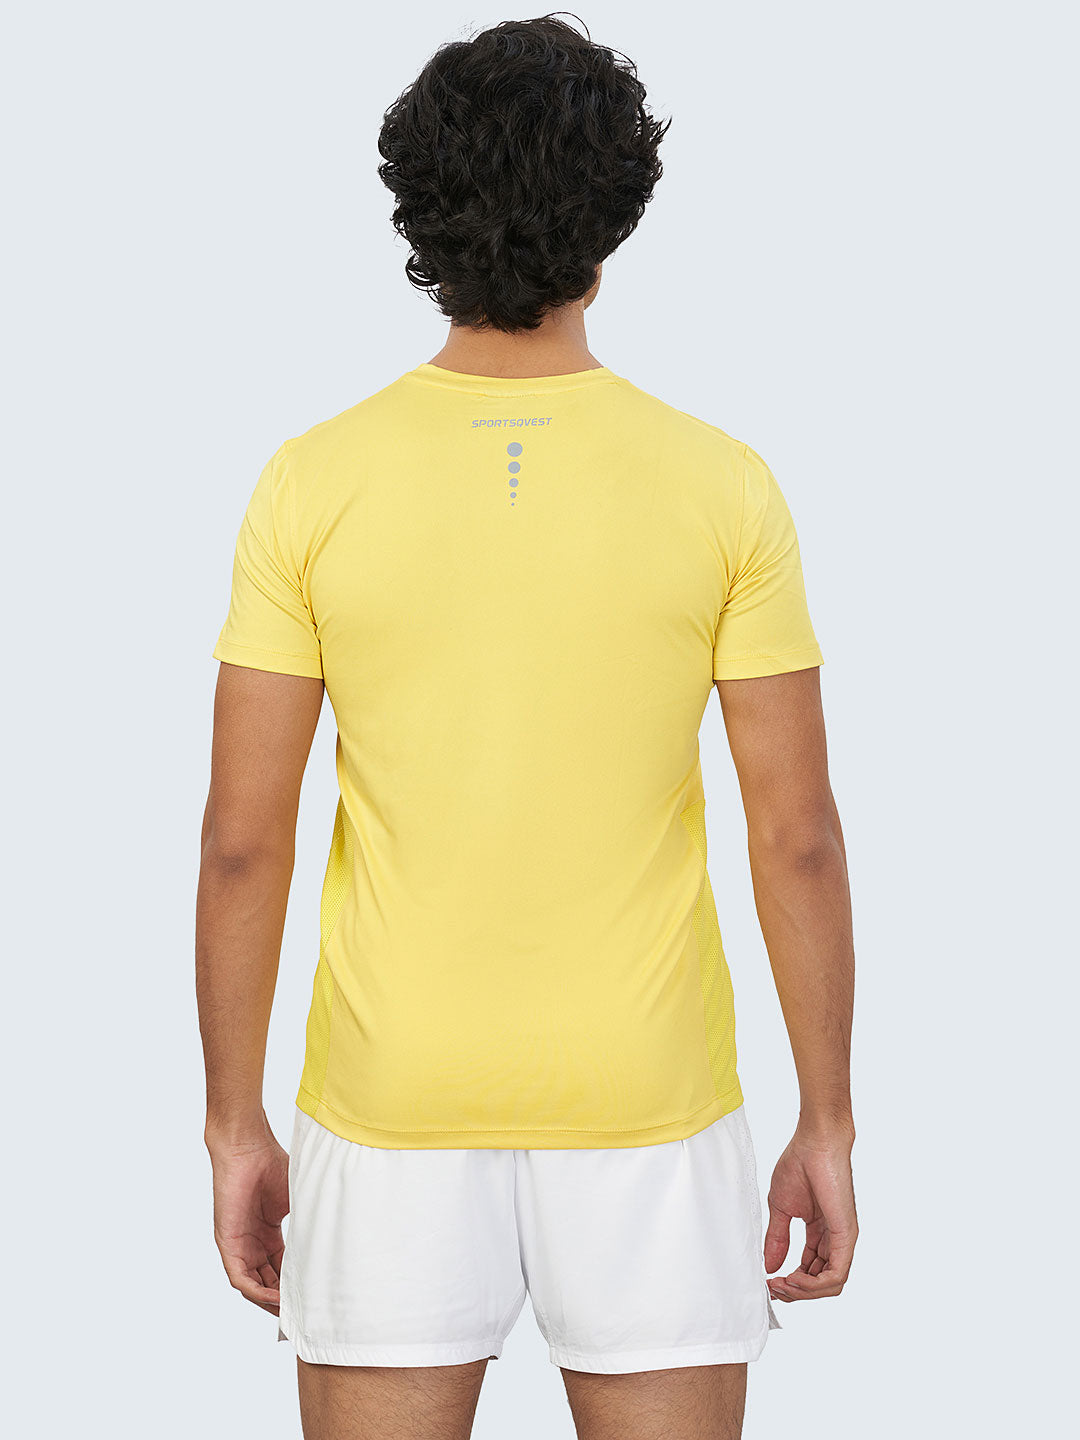 Men Yellow Stretch Solid Round Neck Active T-shirt - A10025YW